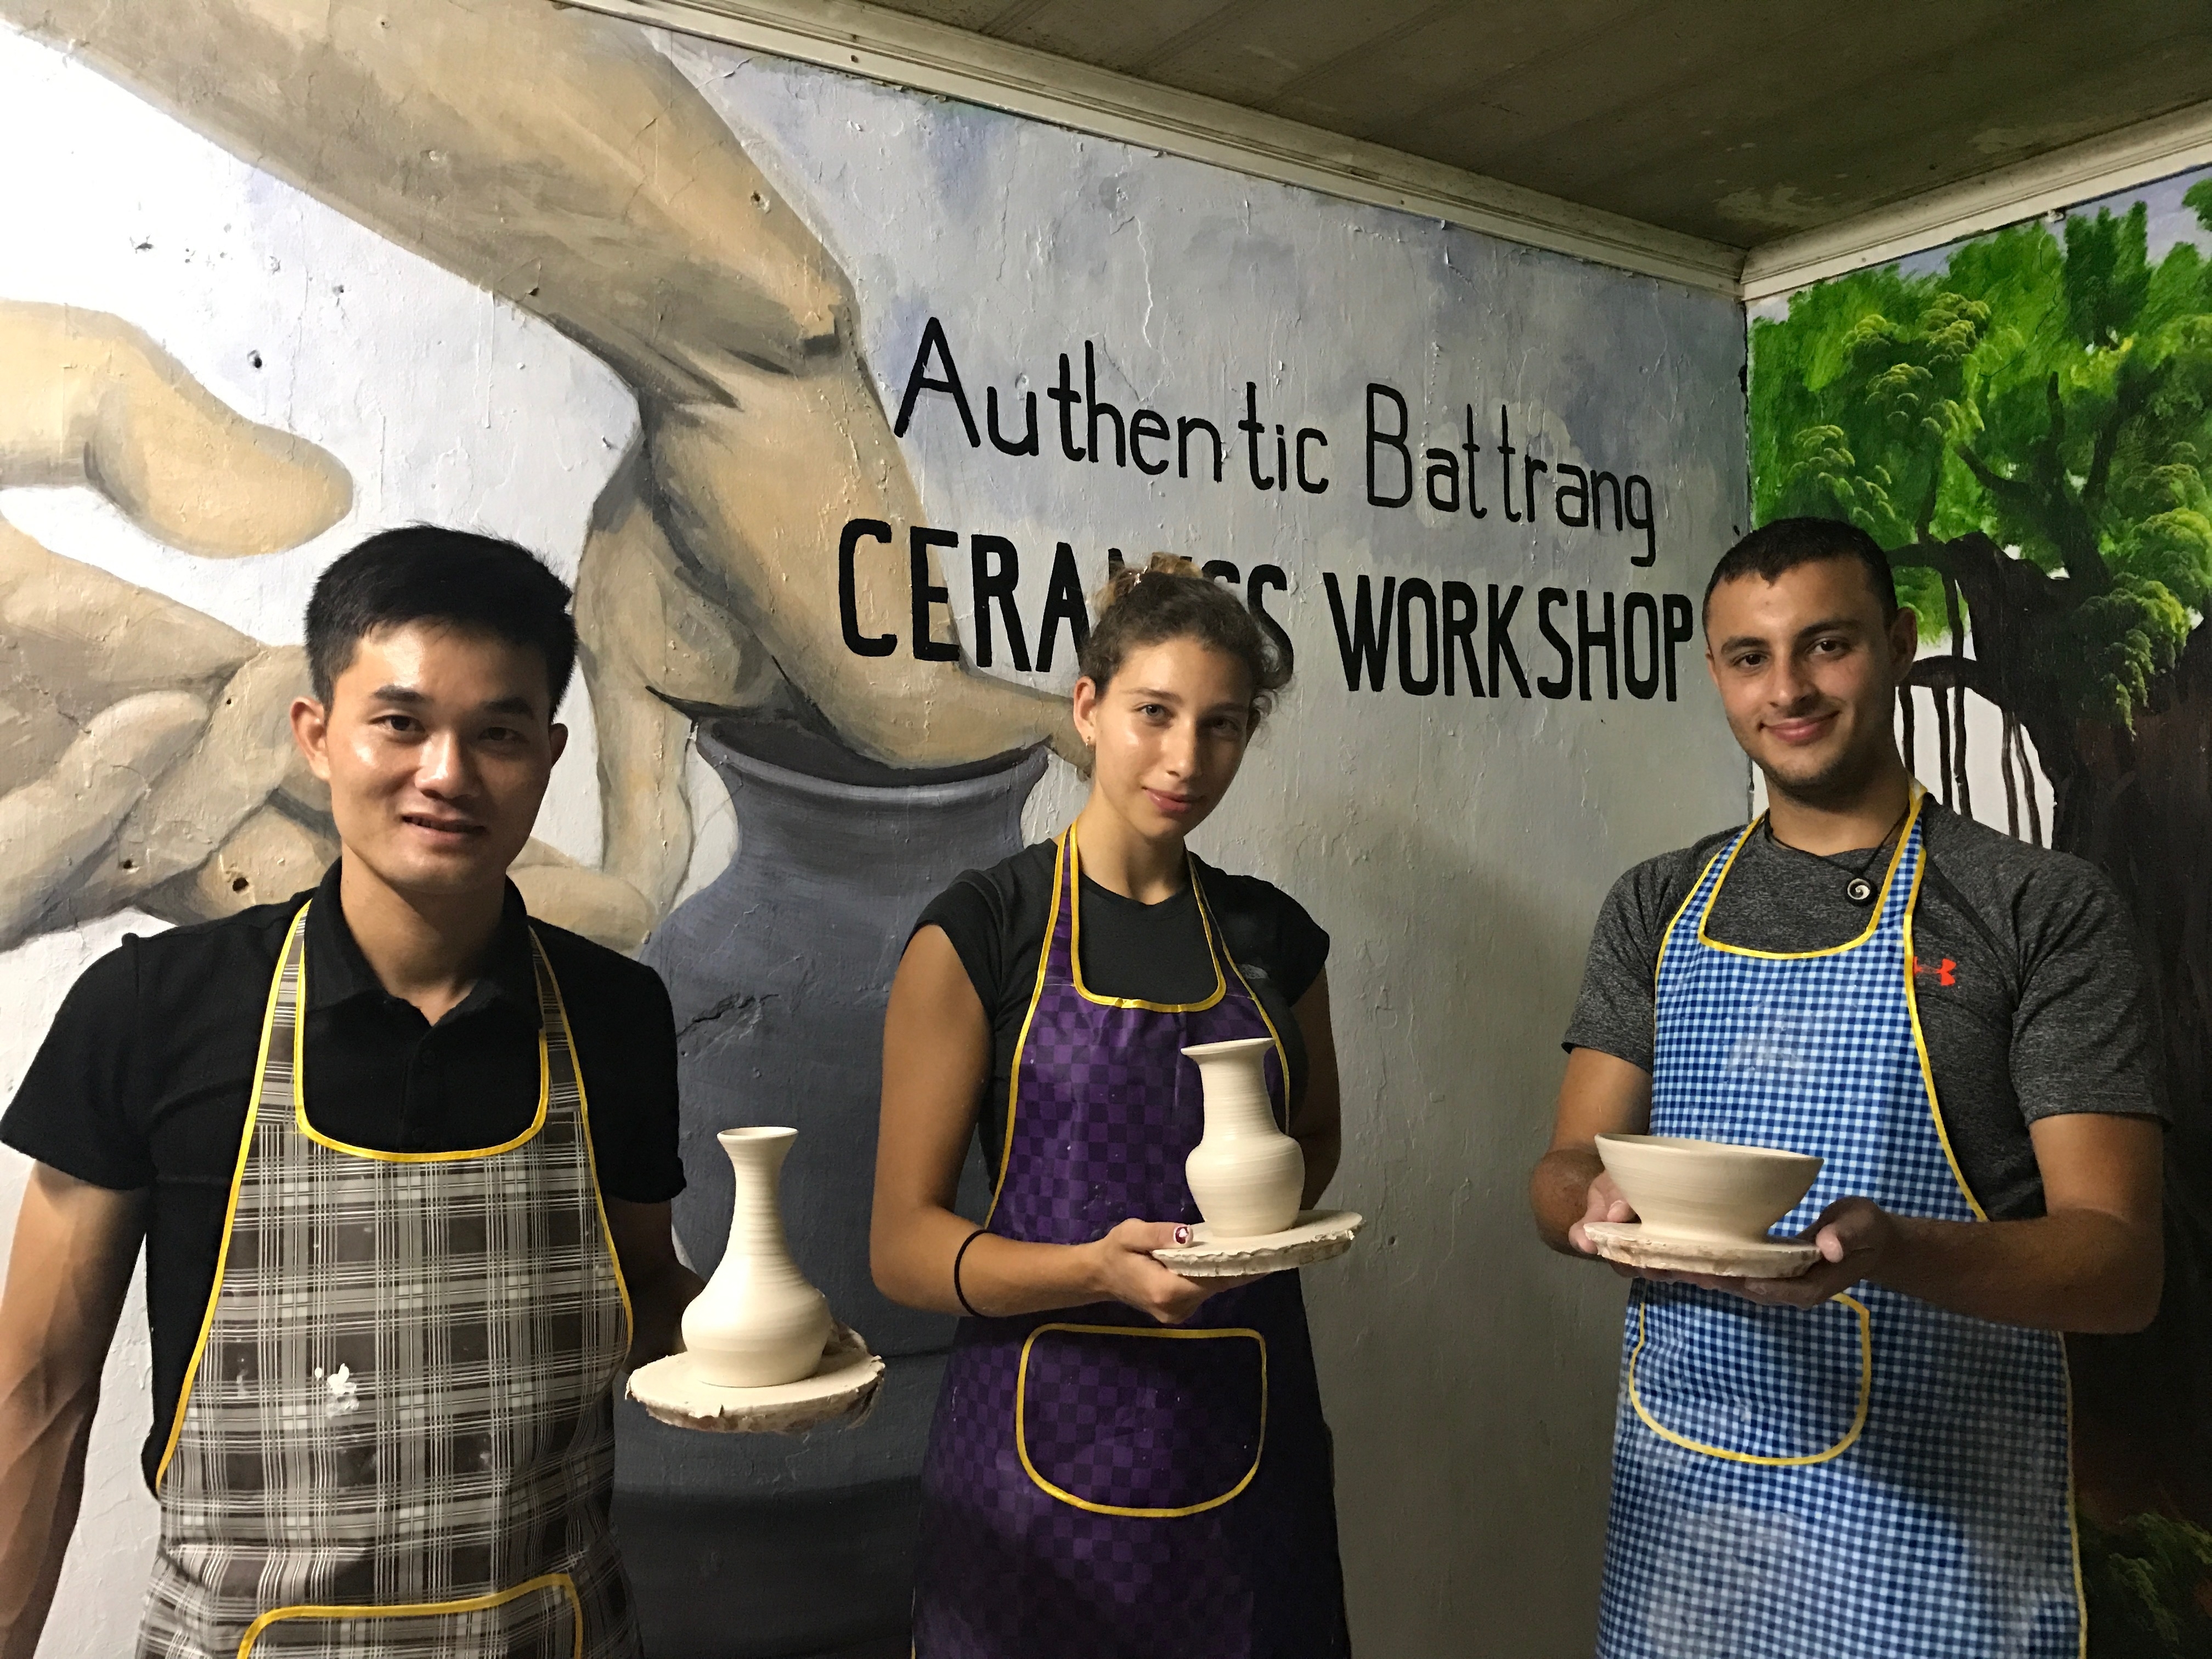 Authentic bat trang - The firs ceramics pottery class in Hanoi